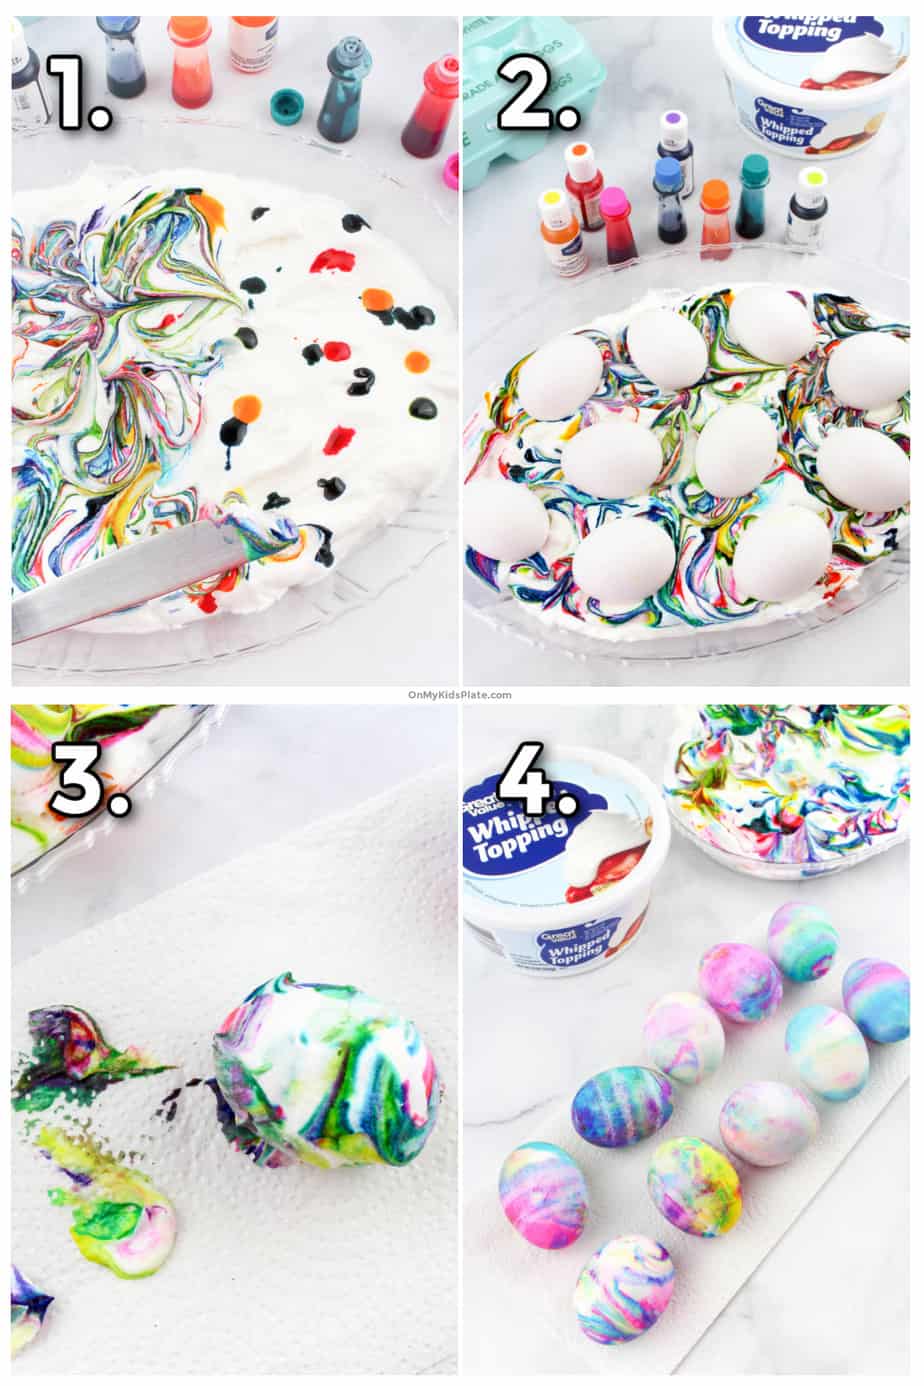 Step by step process photos showing adding food coloring to cool whip, rolling hard boiled eggs in the cream, then whipping the eggs to make colorful dyed Easter Eggs.